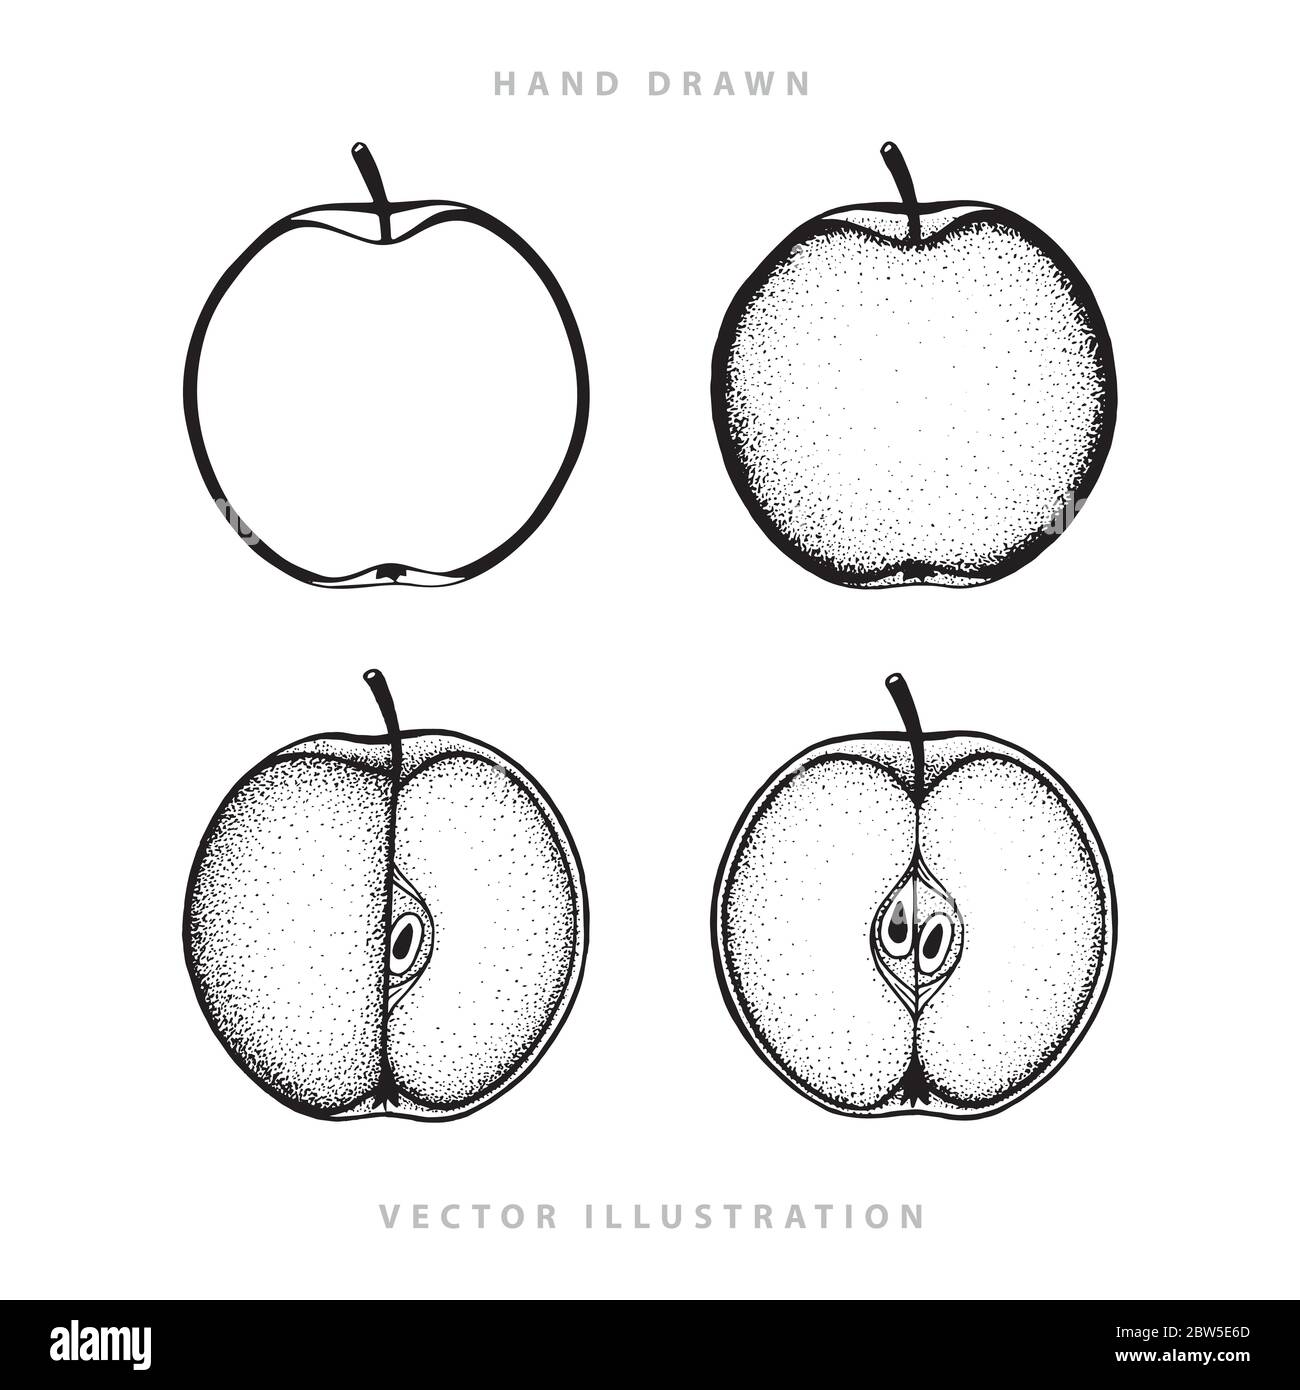 Apple. Hand drawn apples vector illustrations set. Sketch drawing whole, halves and quarters of apple isolated on white background. Stock Vector